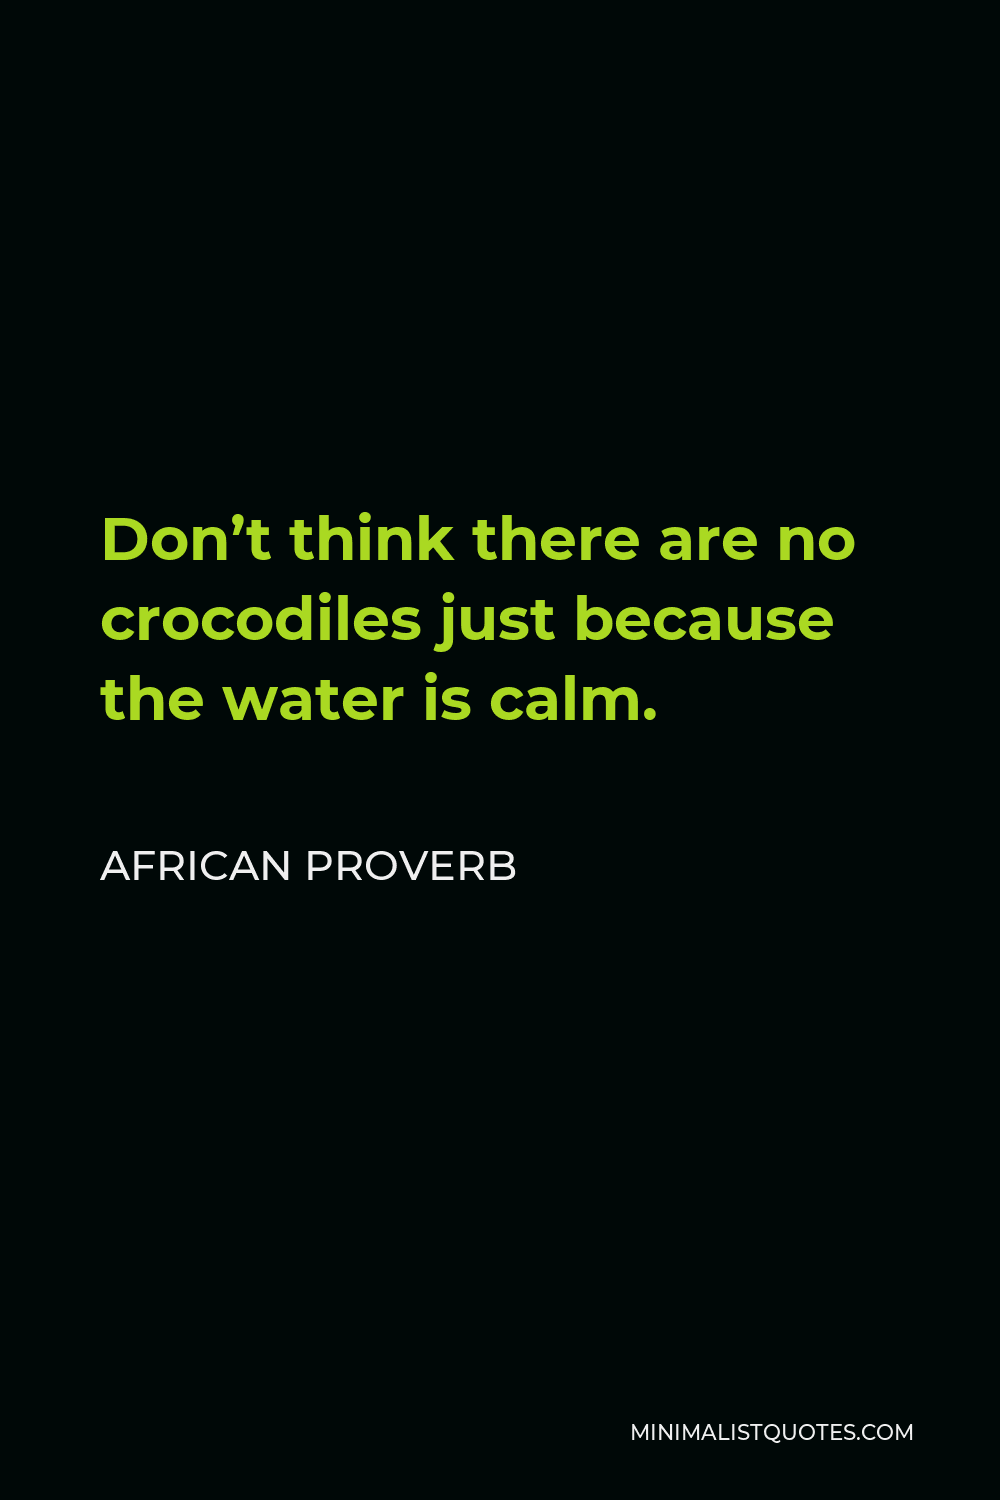 African Proverb Quote - Don’t think there are no crocodiles just because the water is calm.